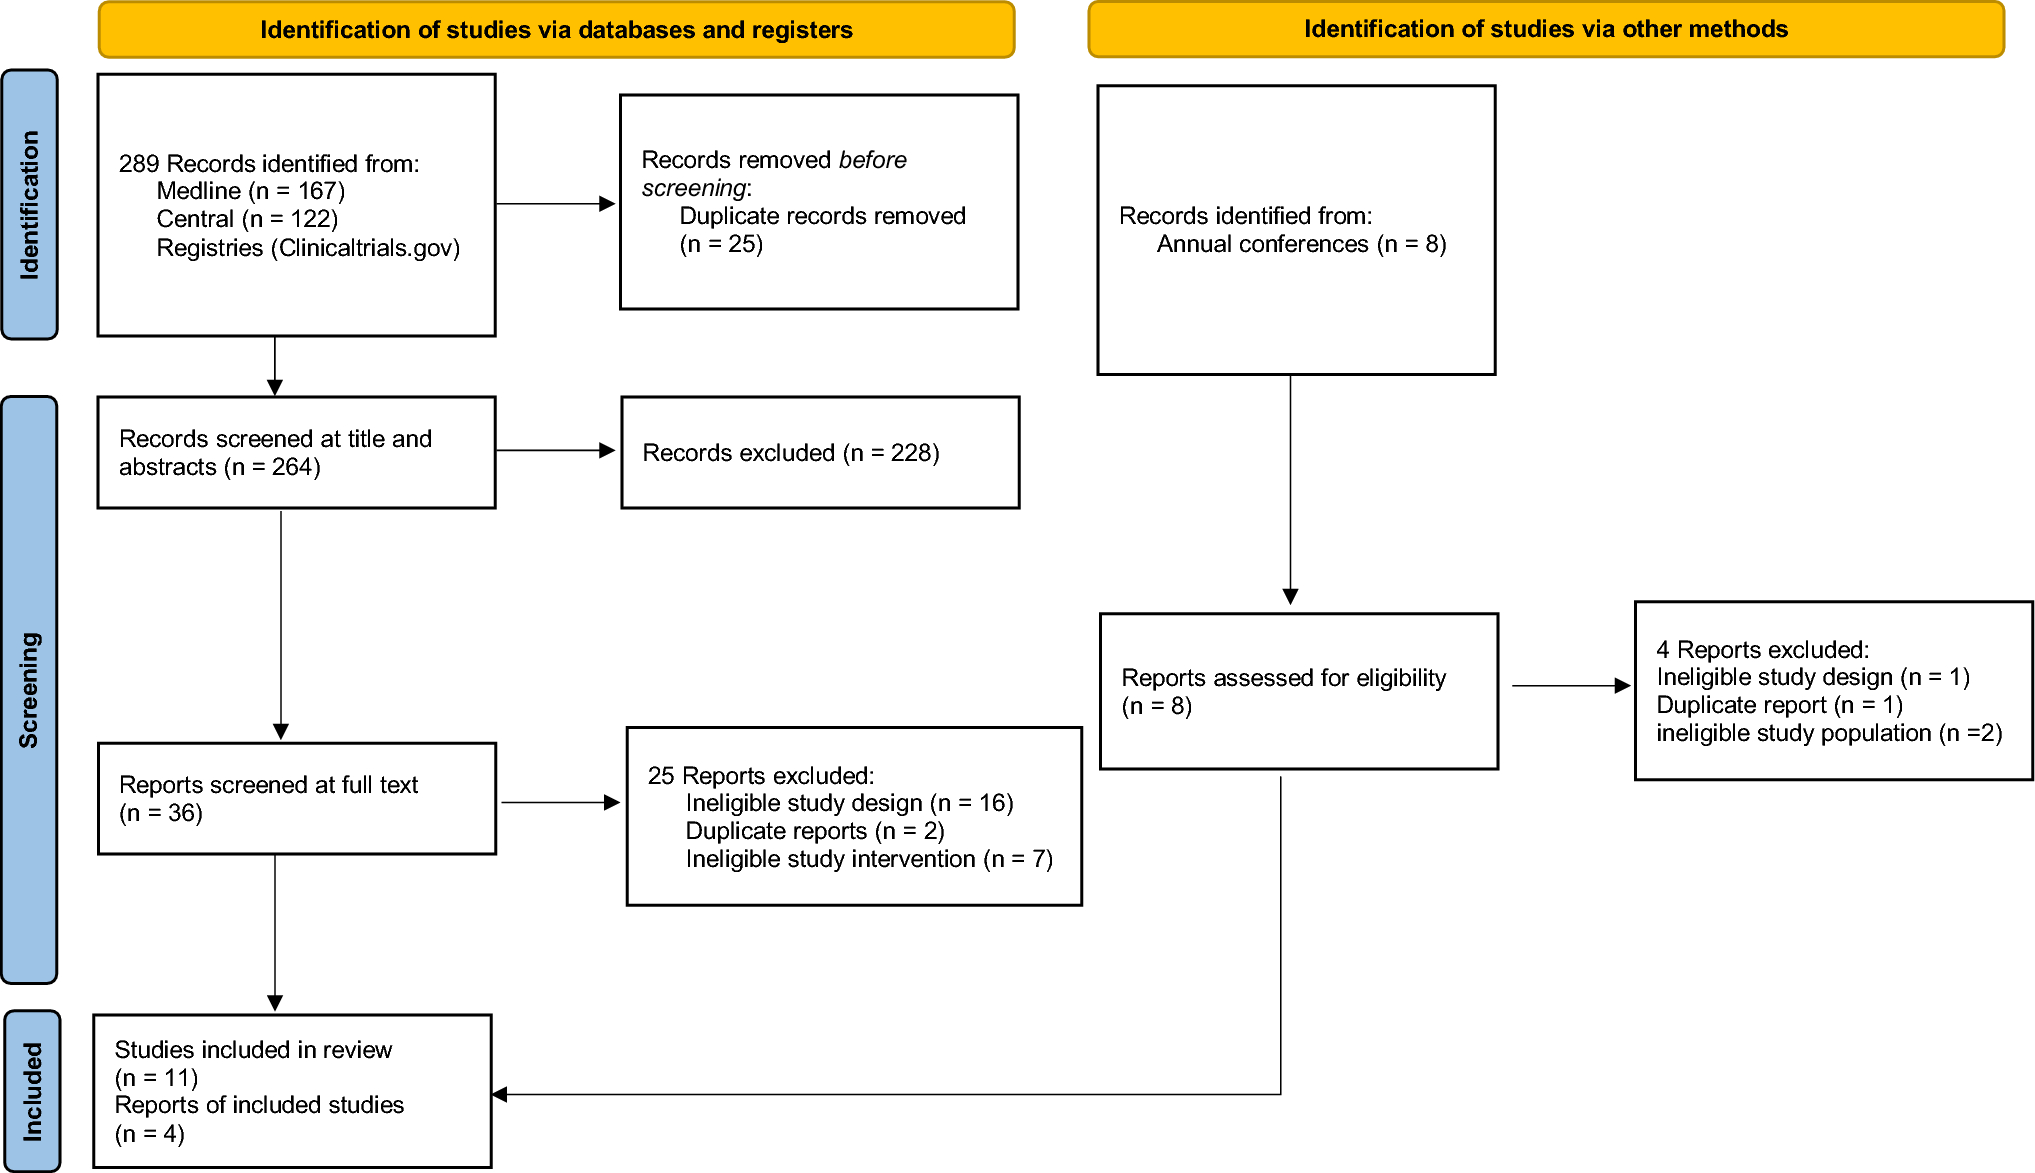 Burosumab Efficacy and Safety in Patients with X-Linked Hypophosphatemia: Systematic Review and Meta-analysis of Real-World Data